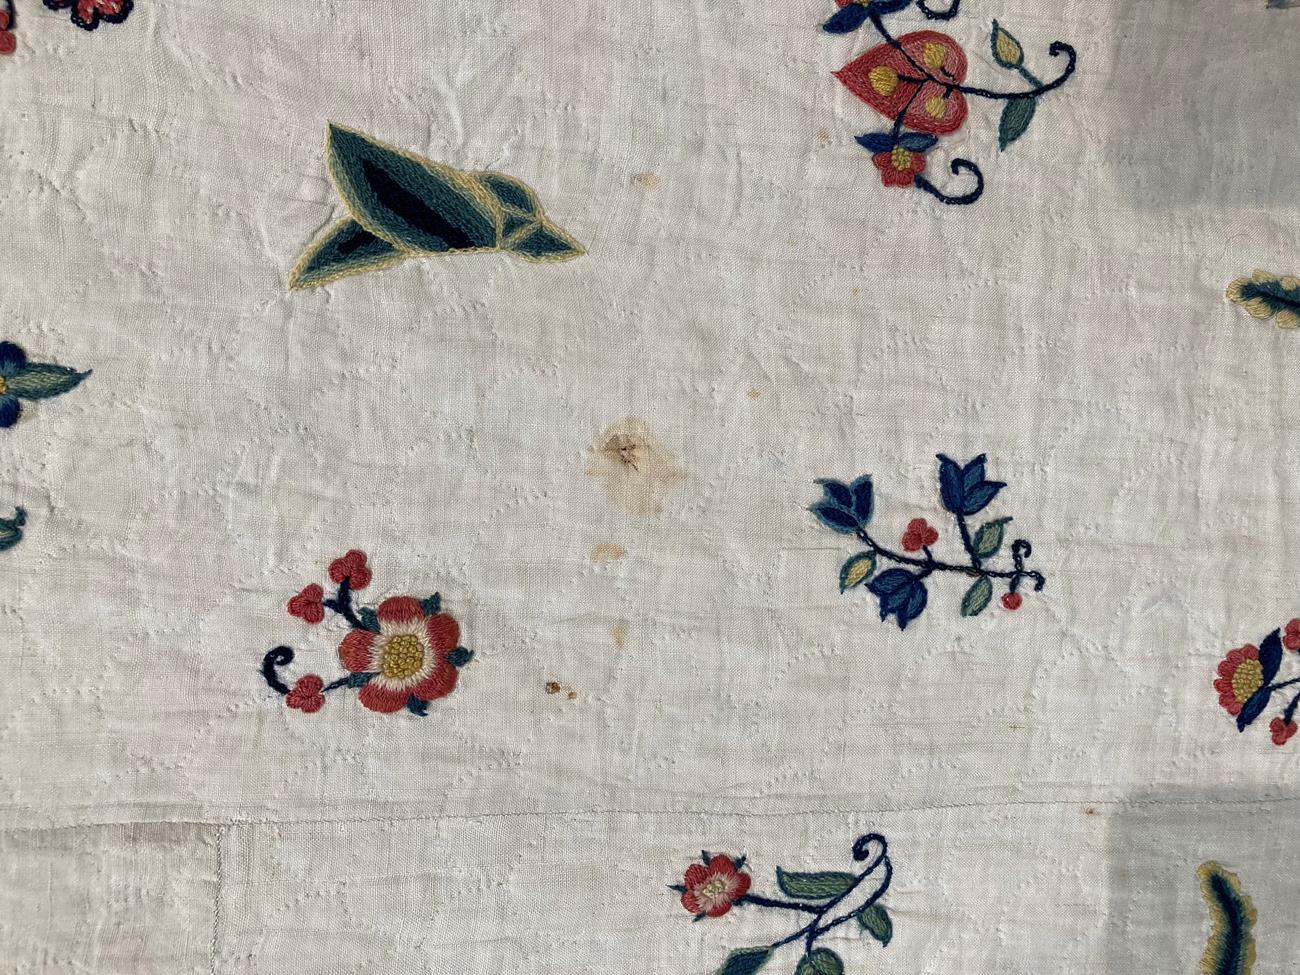 An Exceptional Early 19th Century Patchwork Quilt, with a central panel embroidered with fine wool - Image 25 of 80